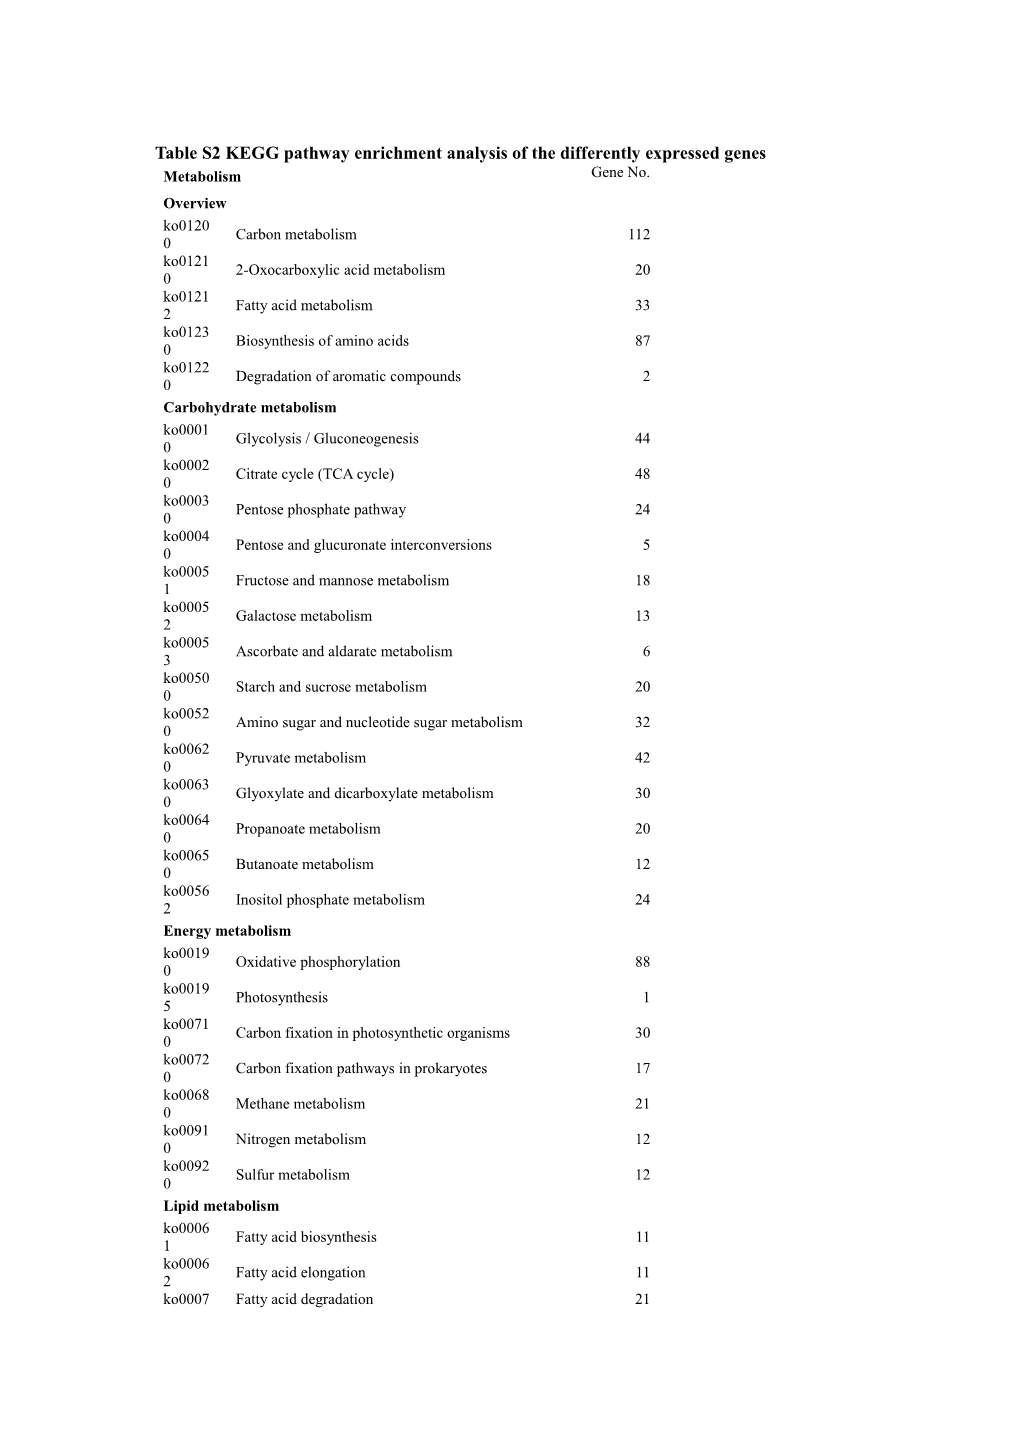 Table S2 KEGG Pathway Enrichment Analysis of the Differently Expressed Genes